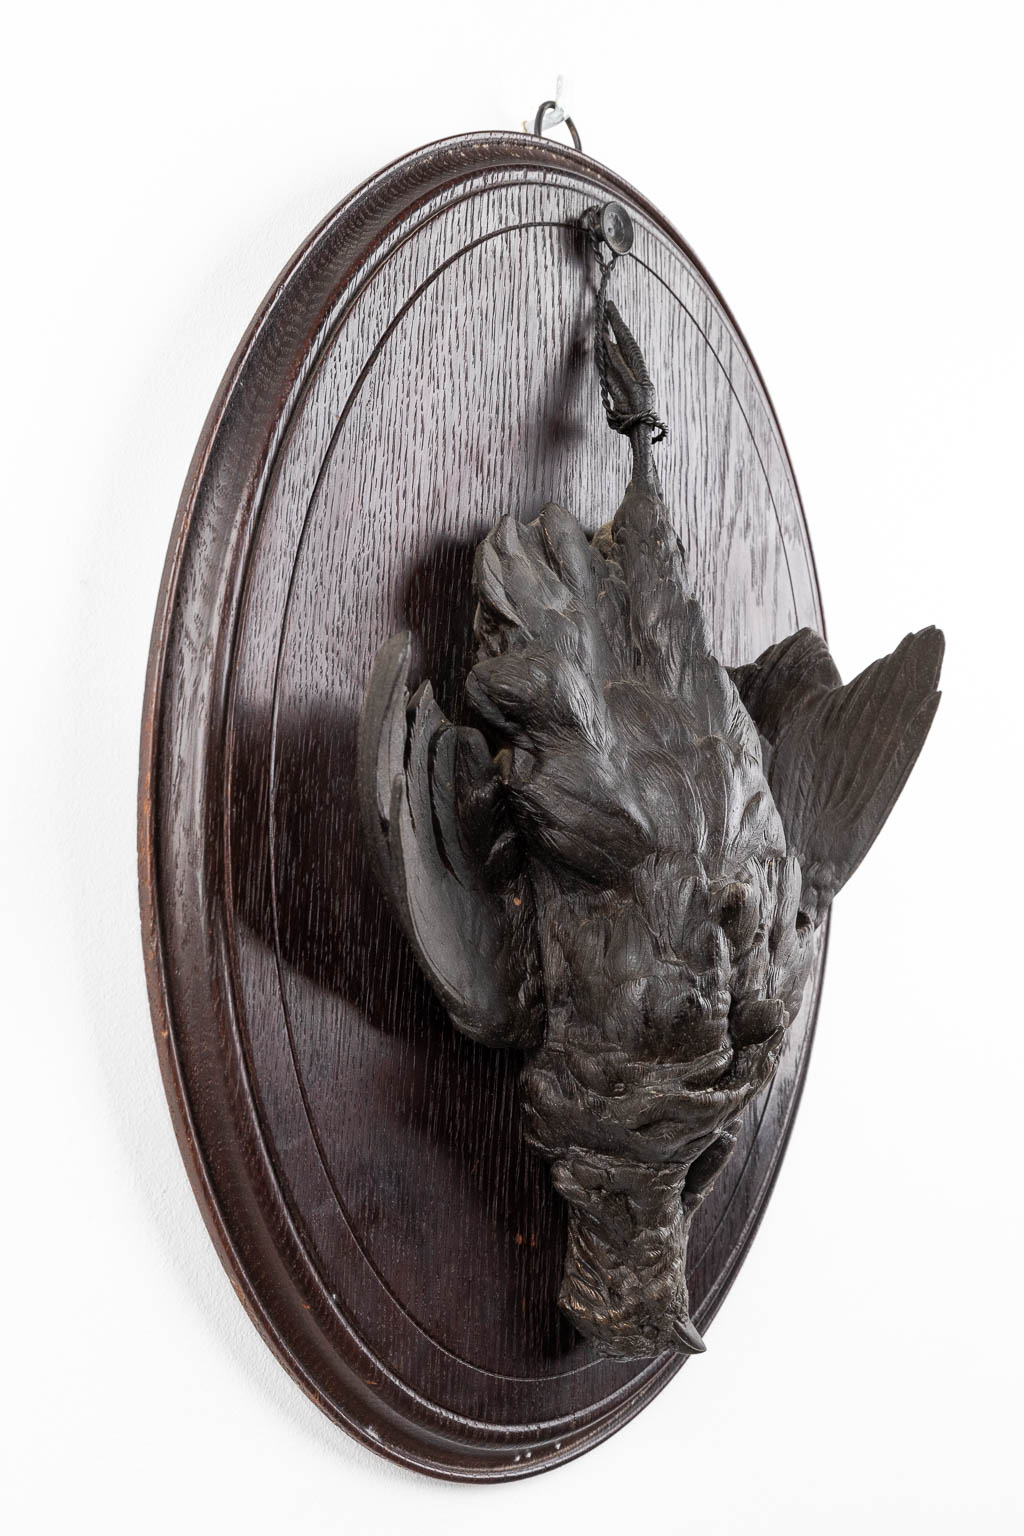 A pair of wall-mounted 'Hunting Trophies', patinated bronze mounted on wood. (D:7 x W:33 x H:46 cm) - Image 13 of 15